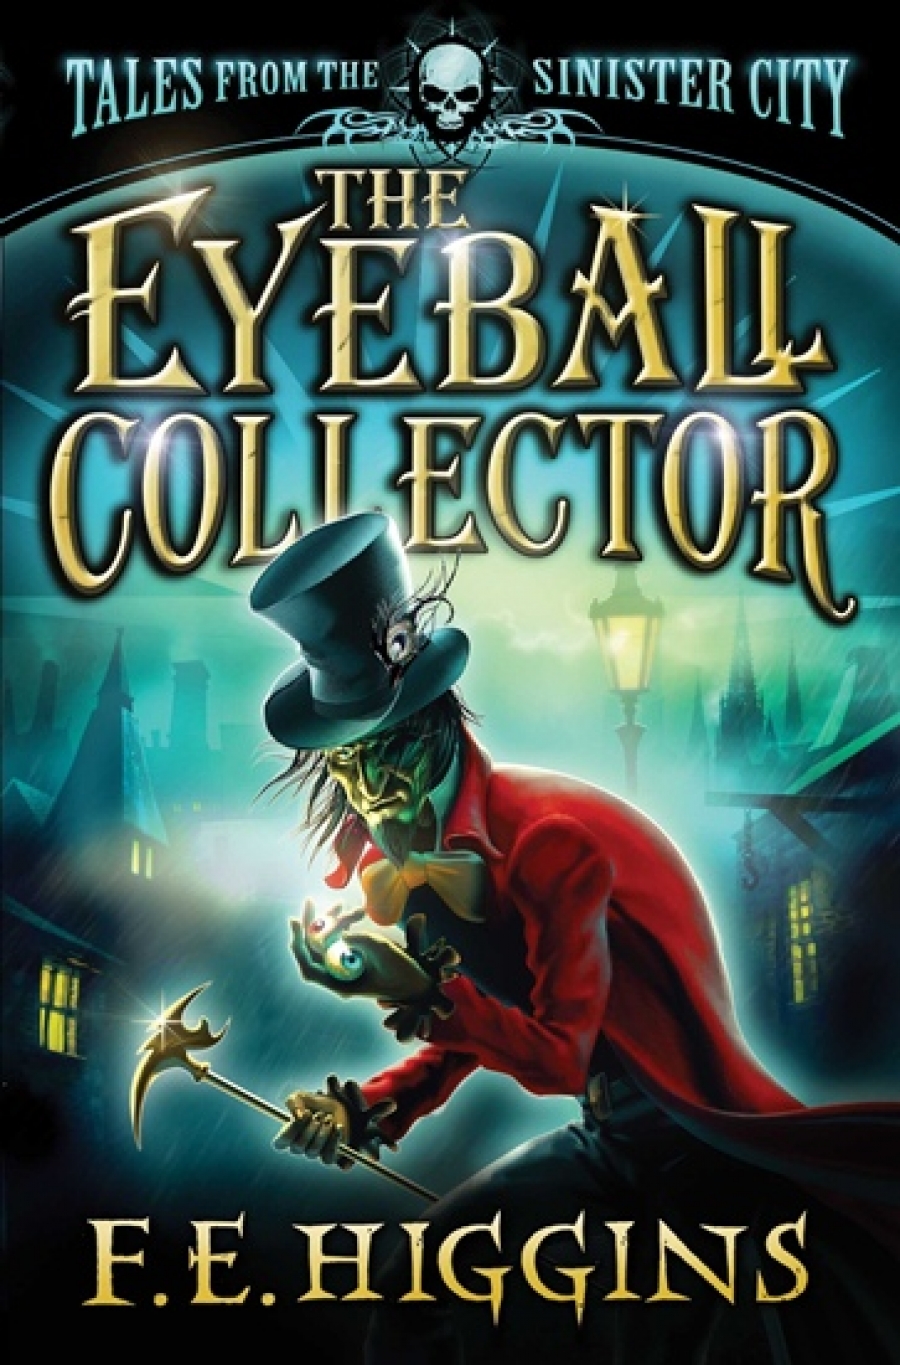 Higgins, F.E. Eyeball Collector: Tales from the Sinister City 